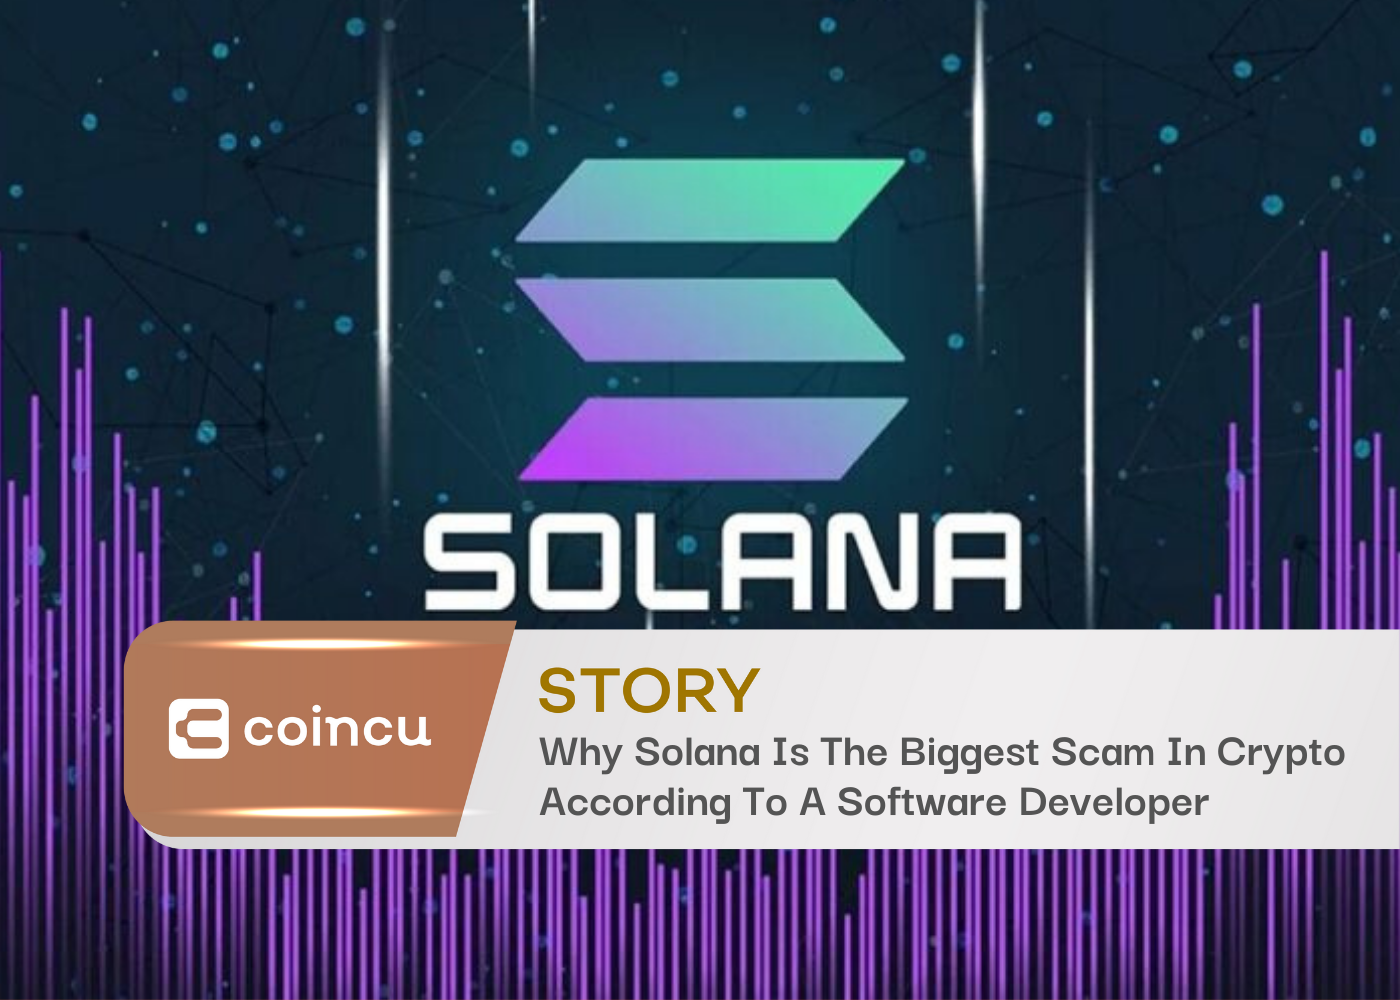 Why Solana Is The Biggest Scam In Crypto